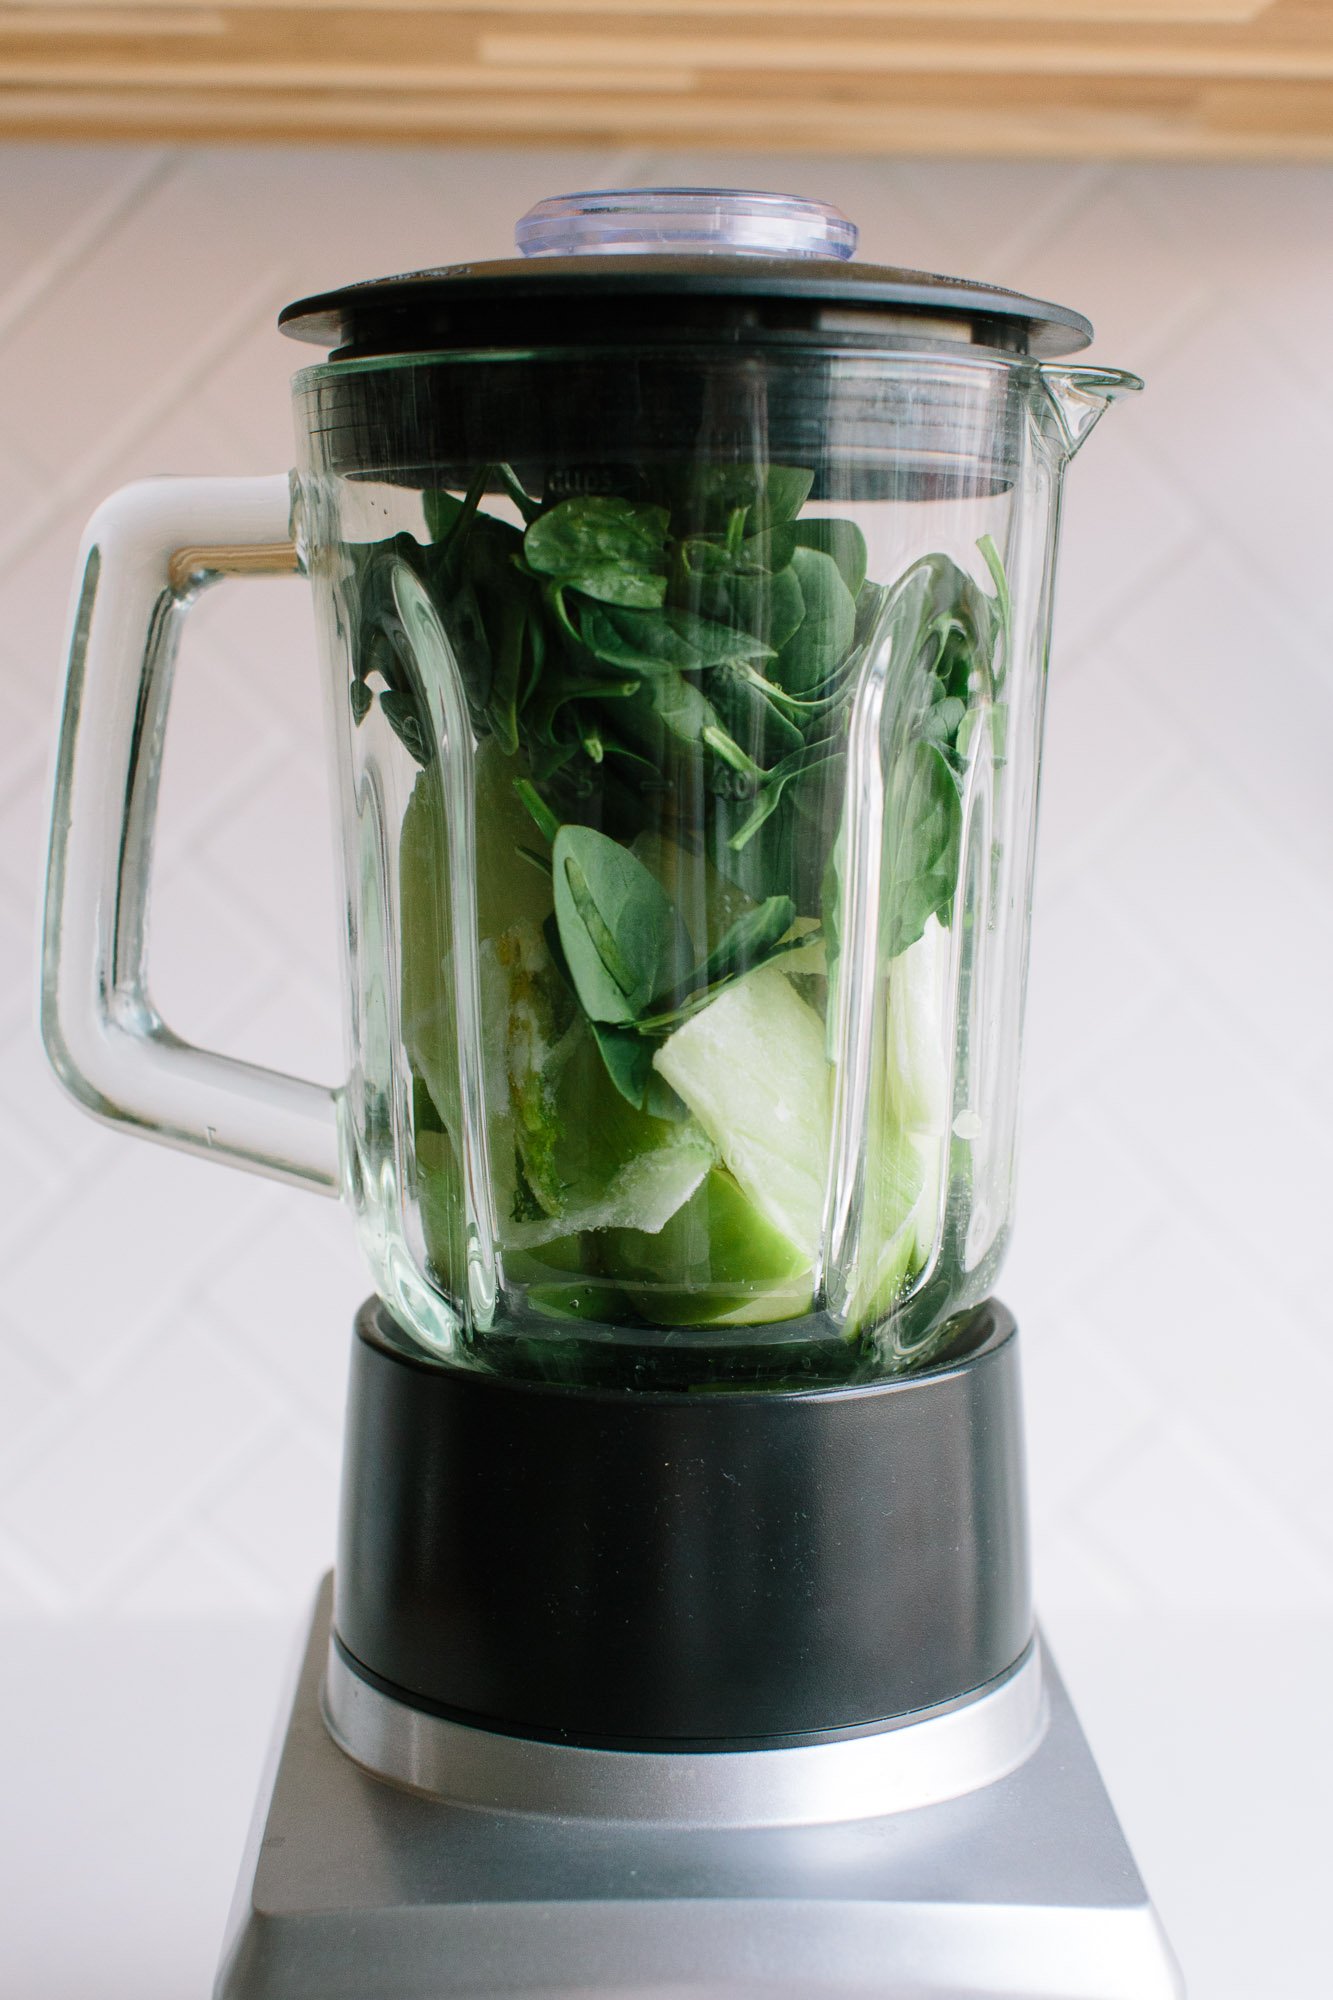 Compress Search tribe When to Replace Broken Blender | The Kitchn